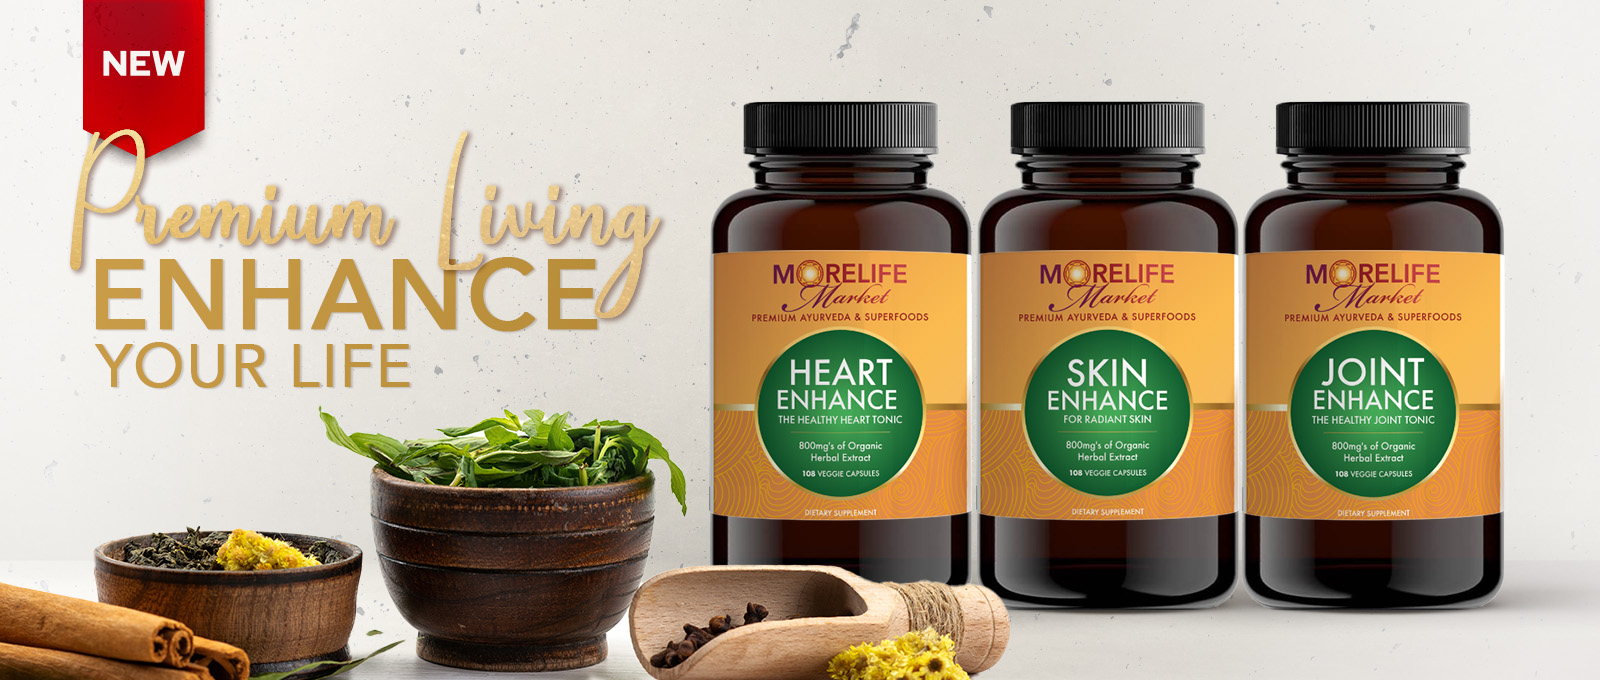 MoreLife Market - Premium Ayurveda - Enhance Your Life with Heart, Skin, and Joint Enhance